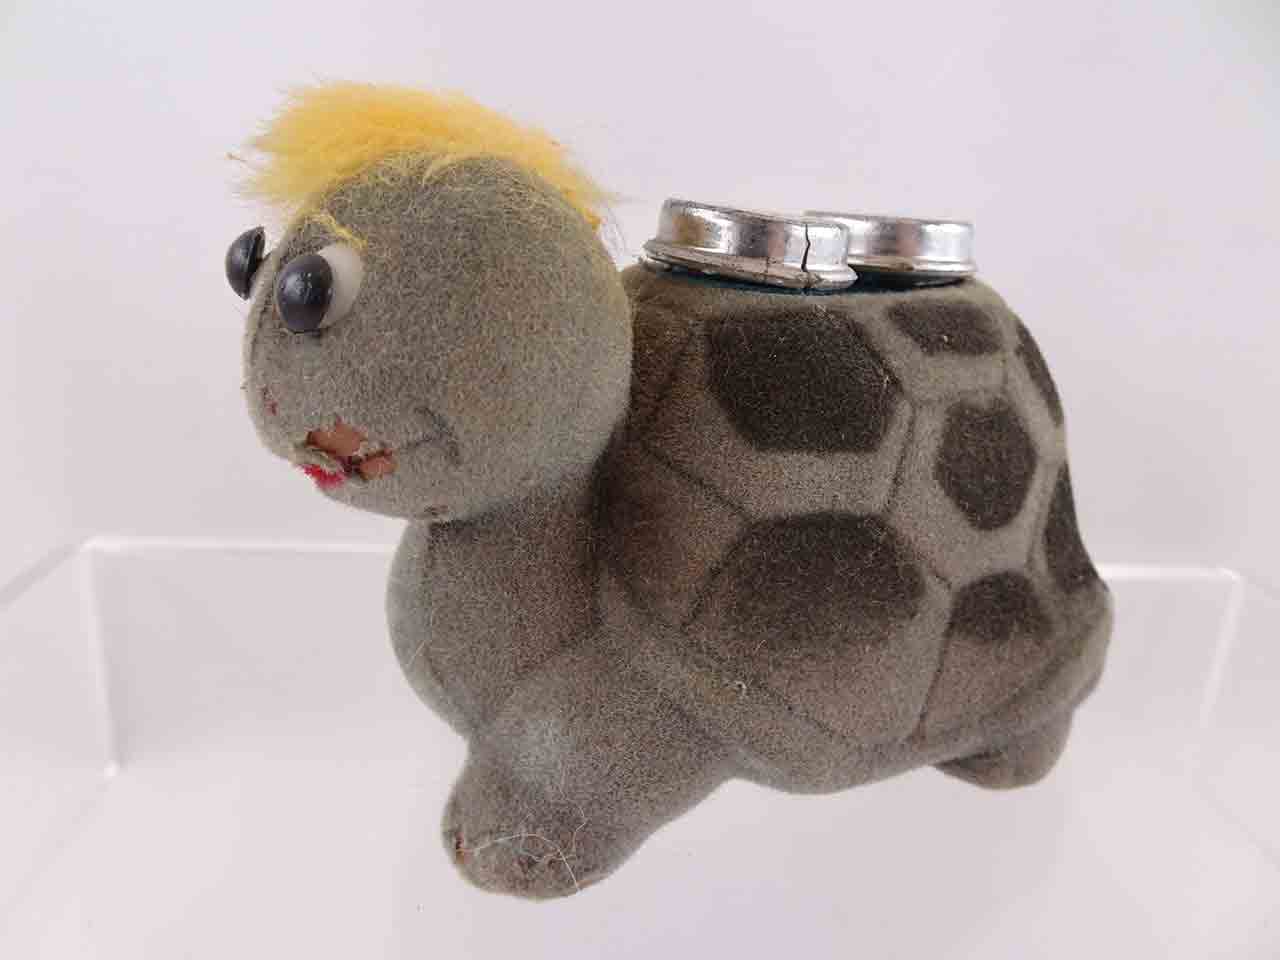 Fuzzy plastic turtle salt and pepper shakers